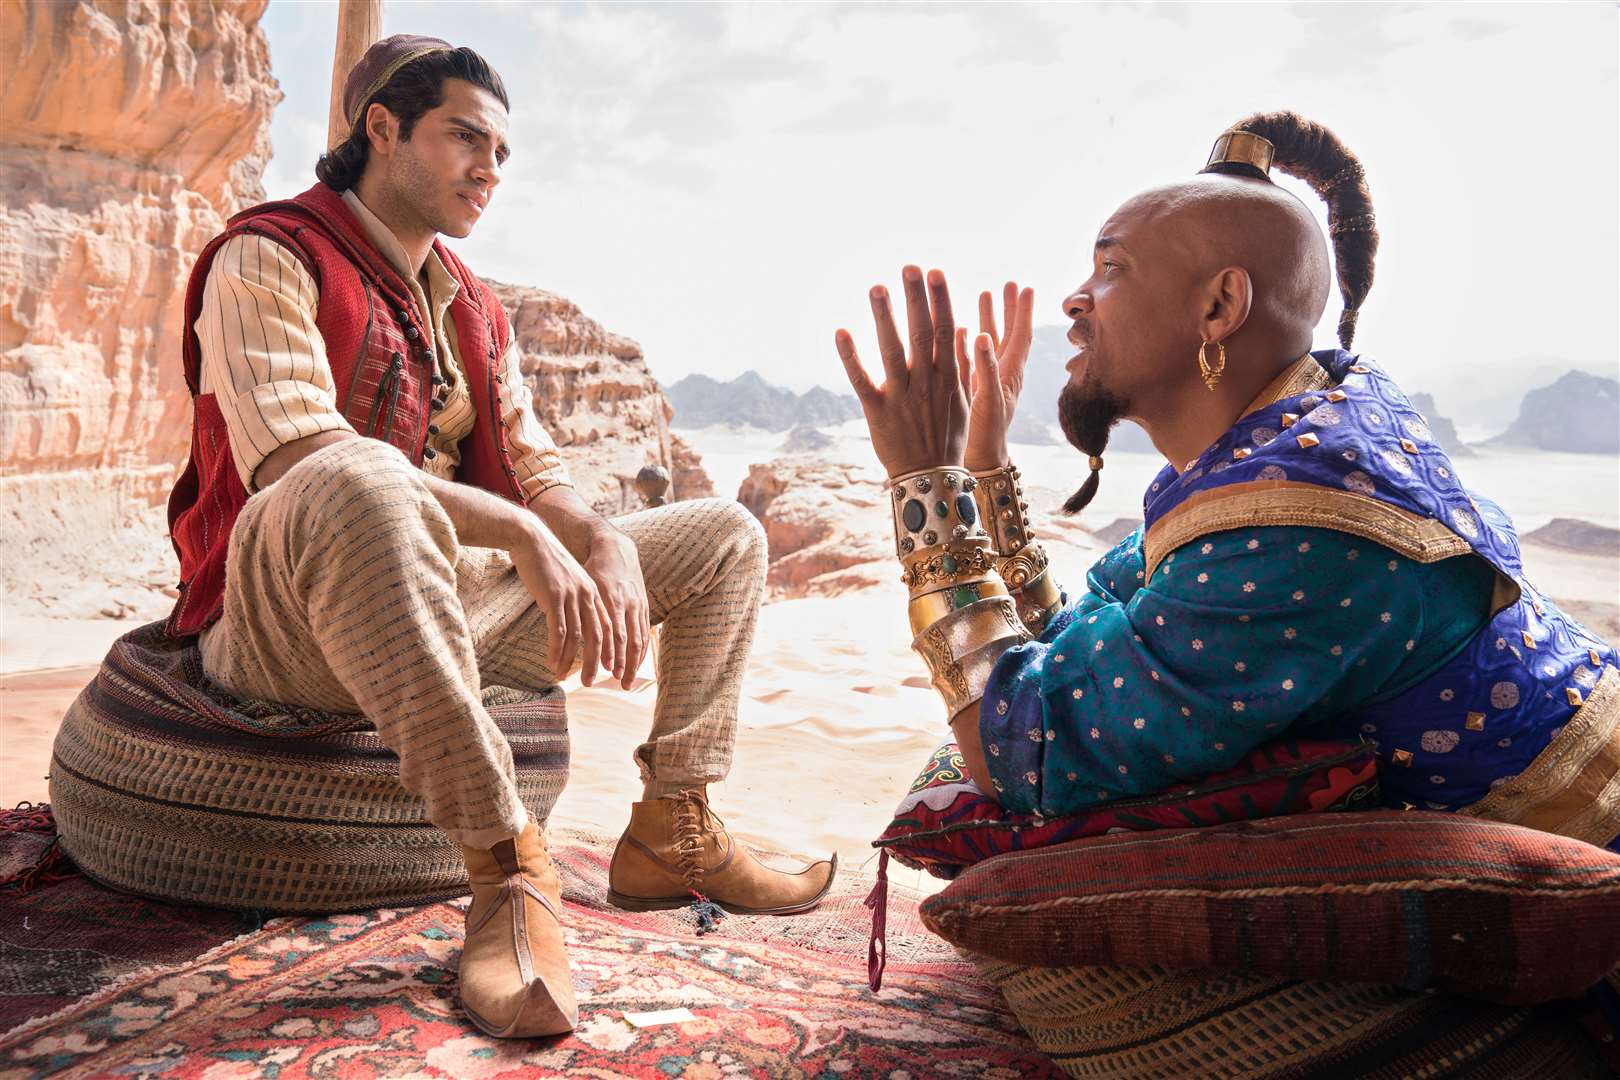 Mena Massoud as the street rat with a heart of gold, Aladdin, and Will Smith as the larger-than-life Genie in Disney’s ALADDIN, directed by Guy Ritchie